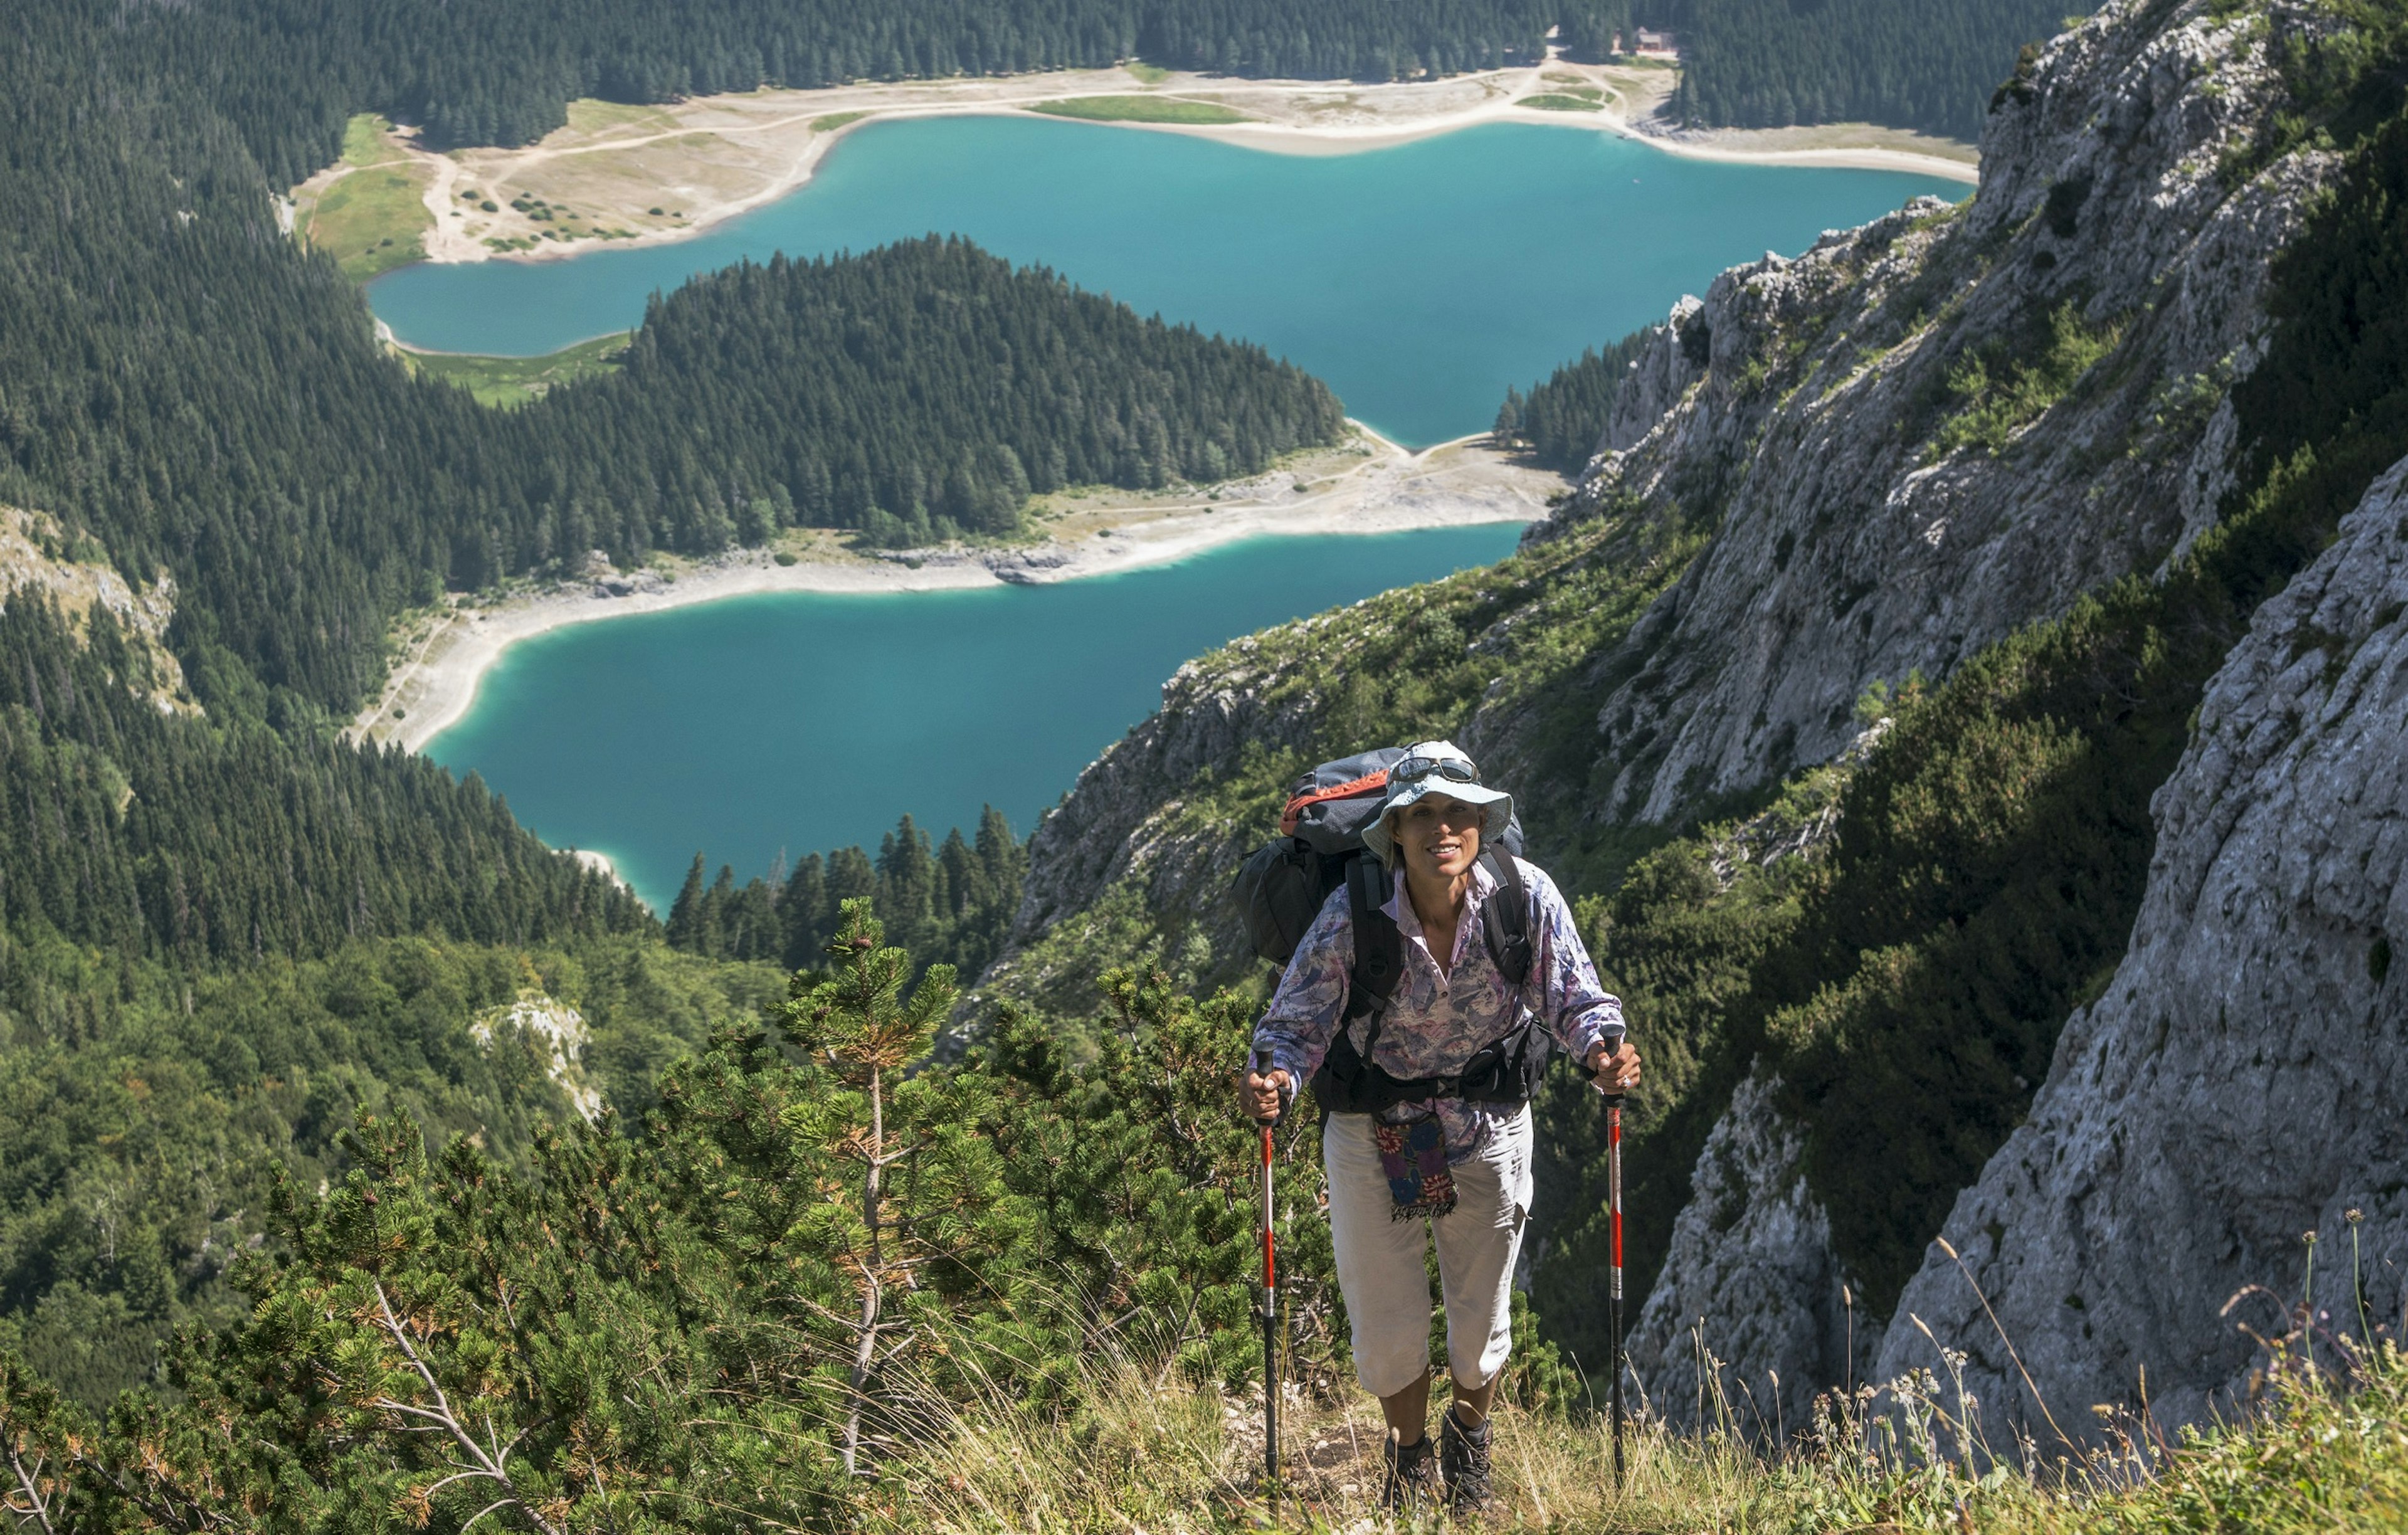 Scene in Durmitor mountains (Montenegro). Woman with backpack against Black Lake background.; Shutterstock ID 791462698; your: Ben N Buckner; gl: 65050; netsuite: Client Services; full: Montenegro